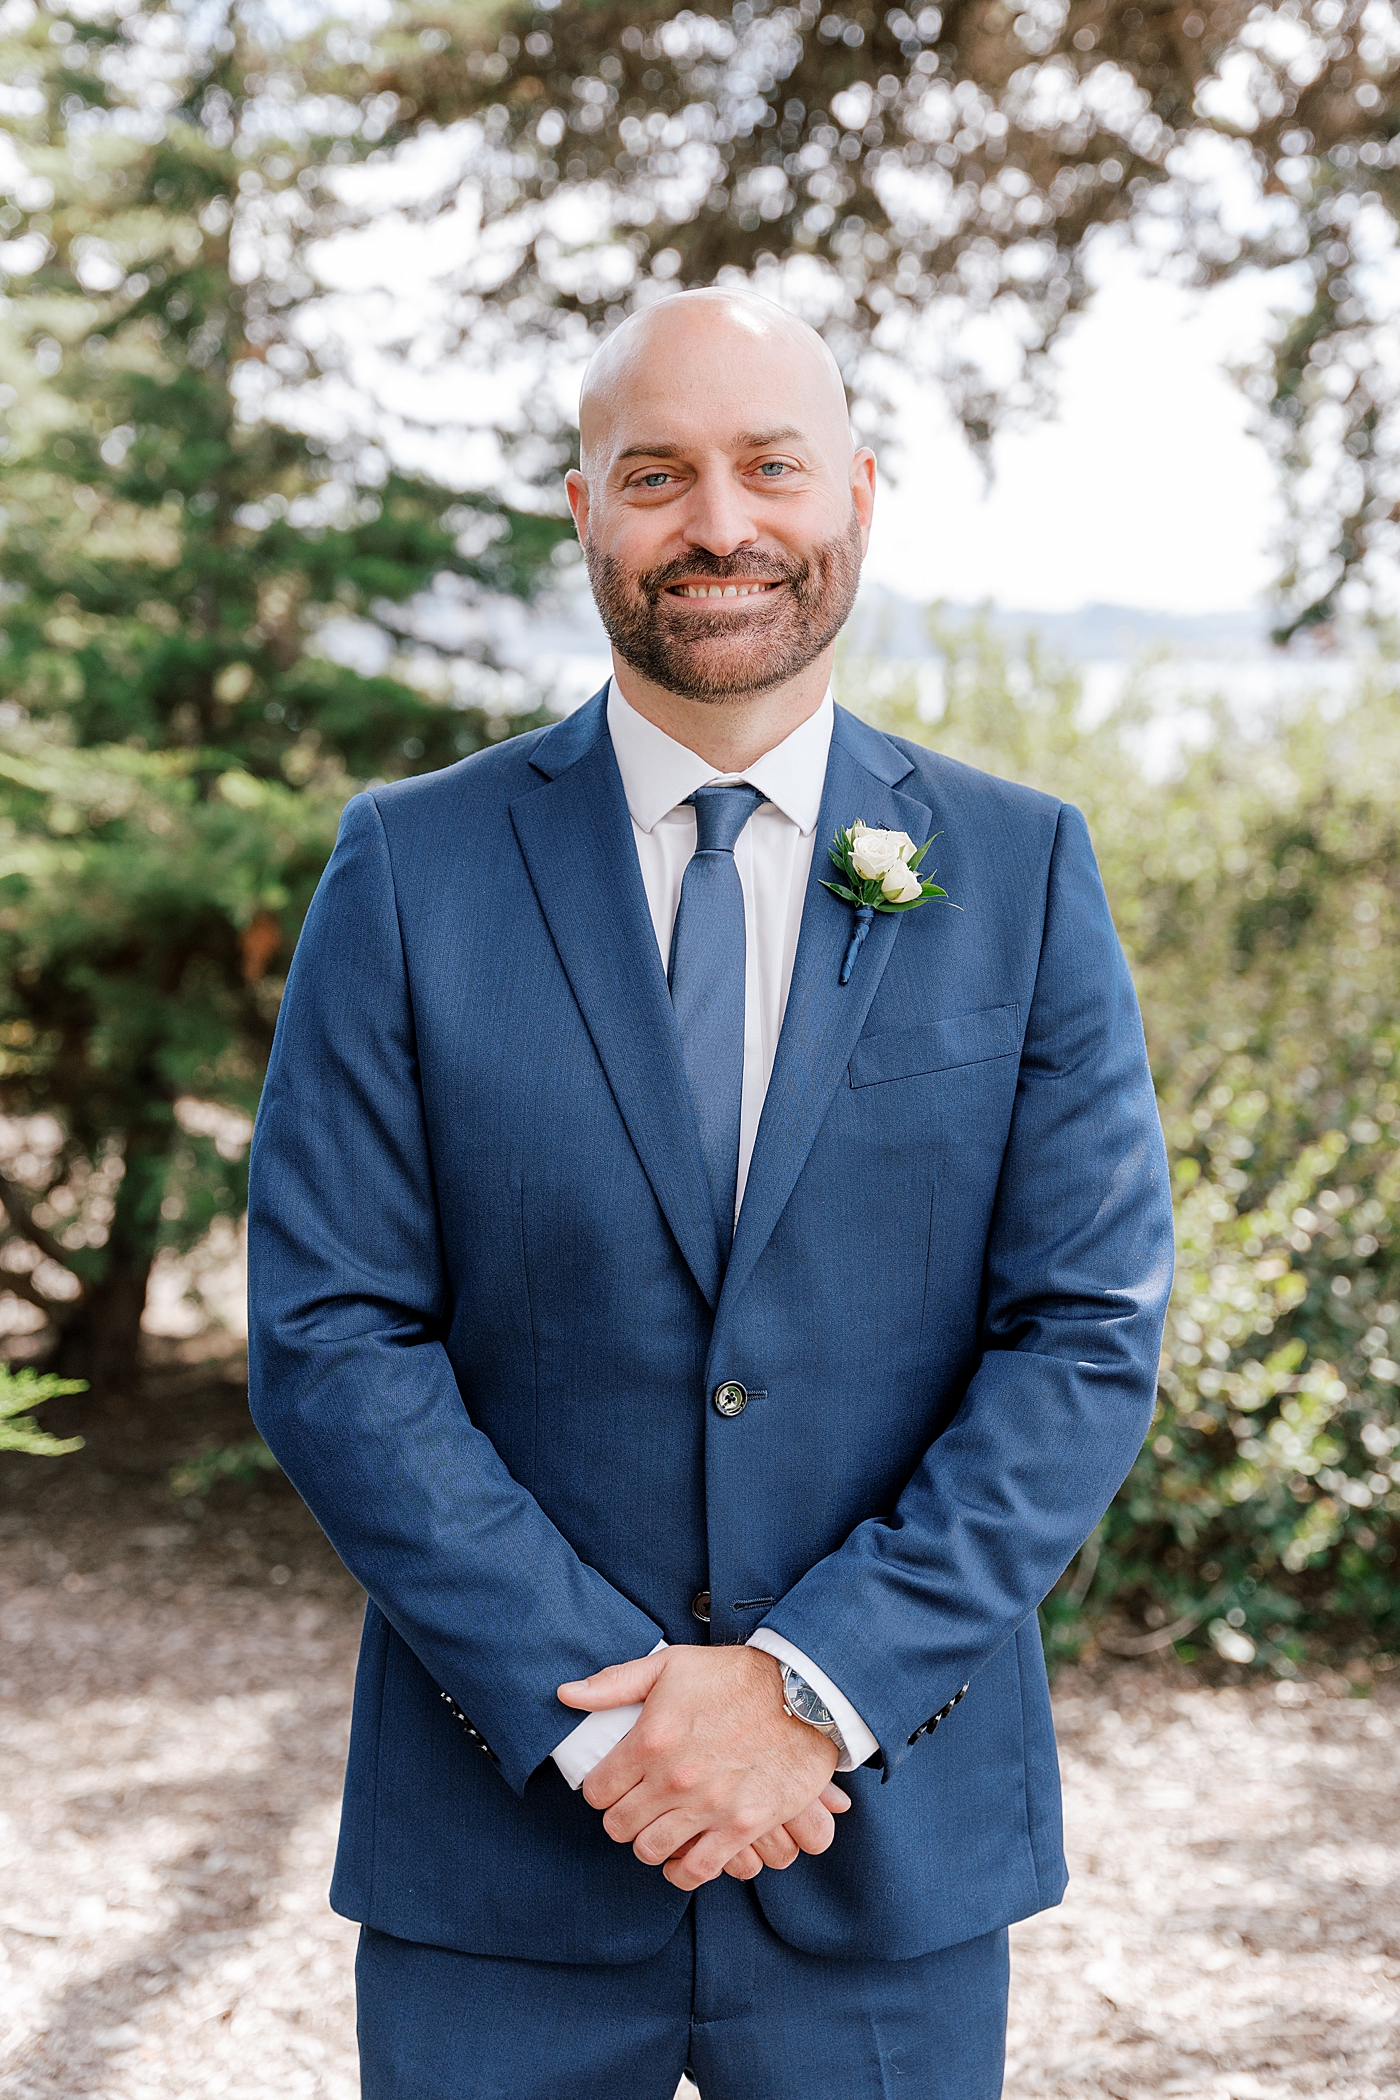 Groom in navy suit smiling at the camera with hands crossed in front | Image by Hope Helmuth Photography